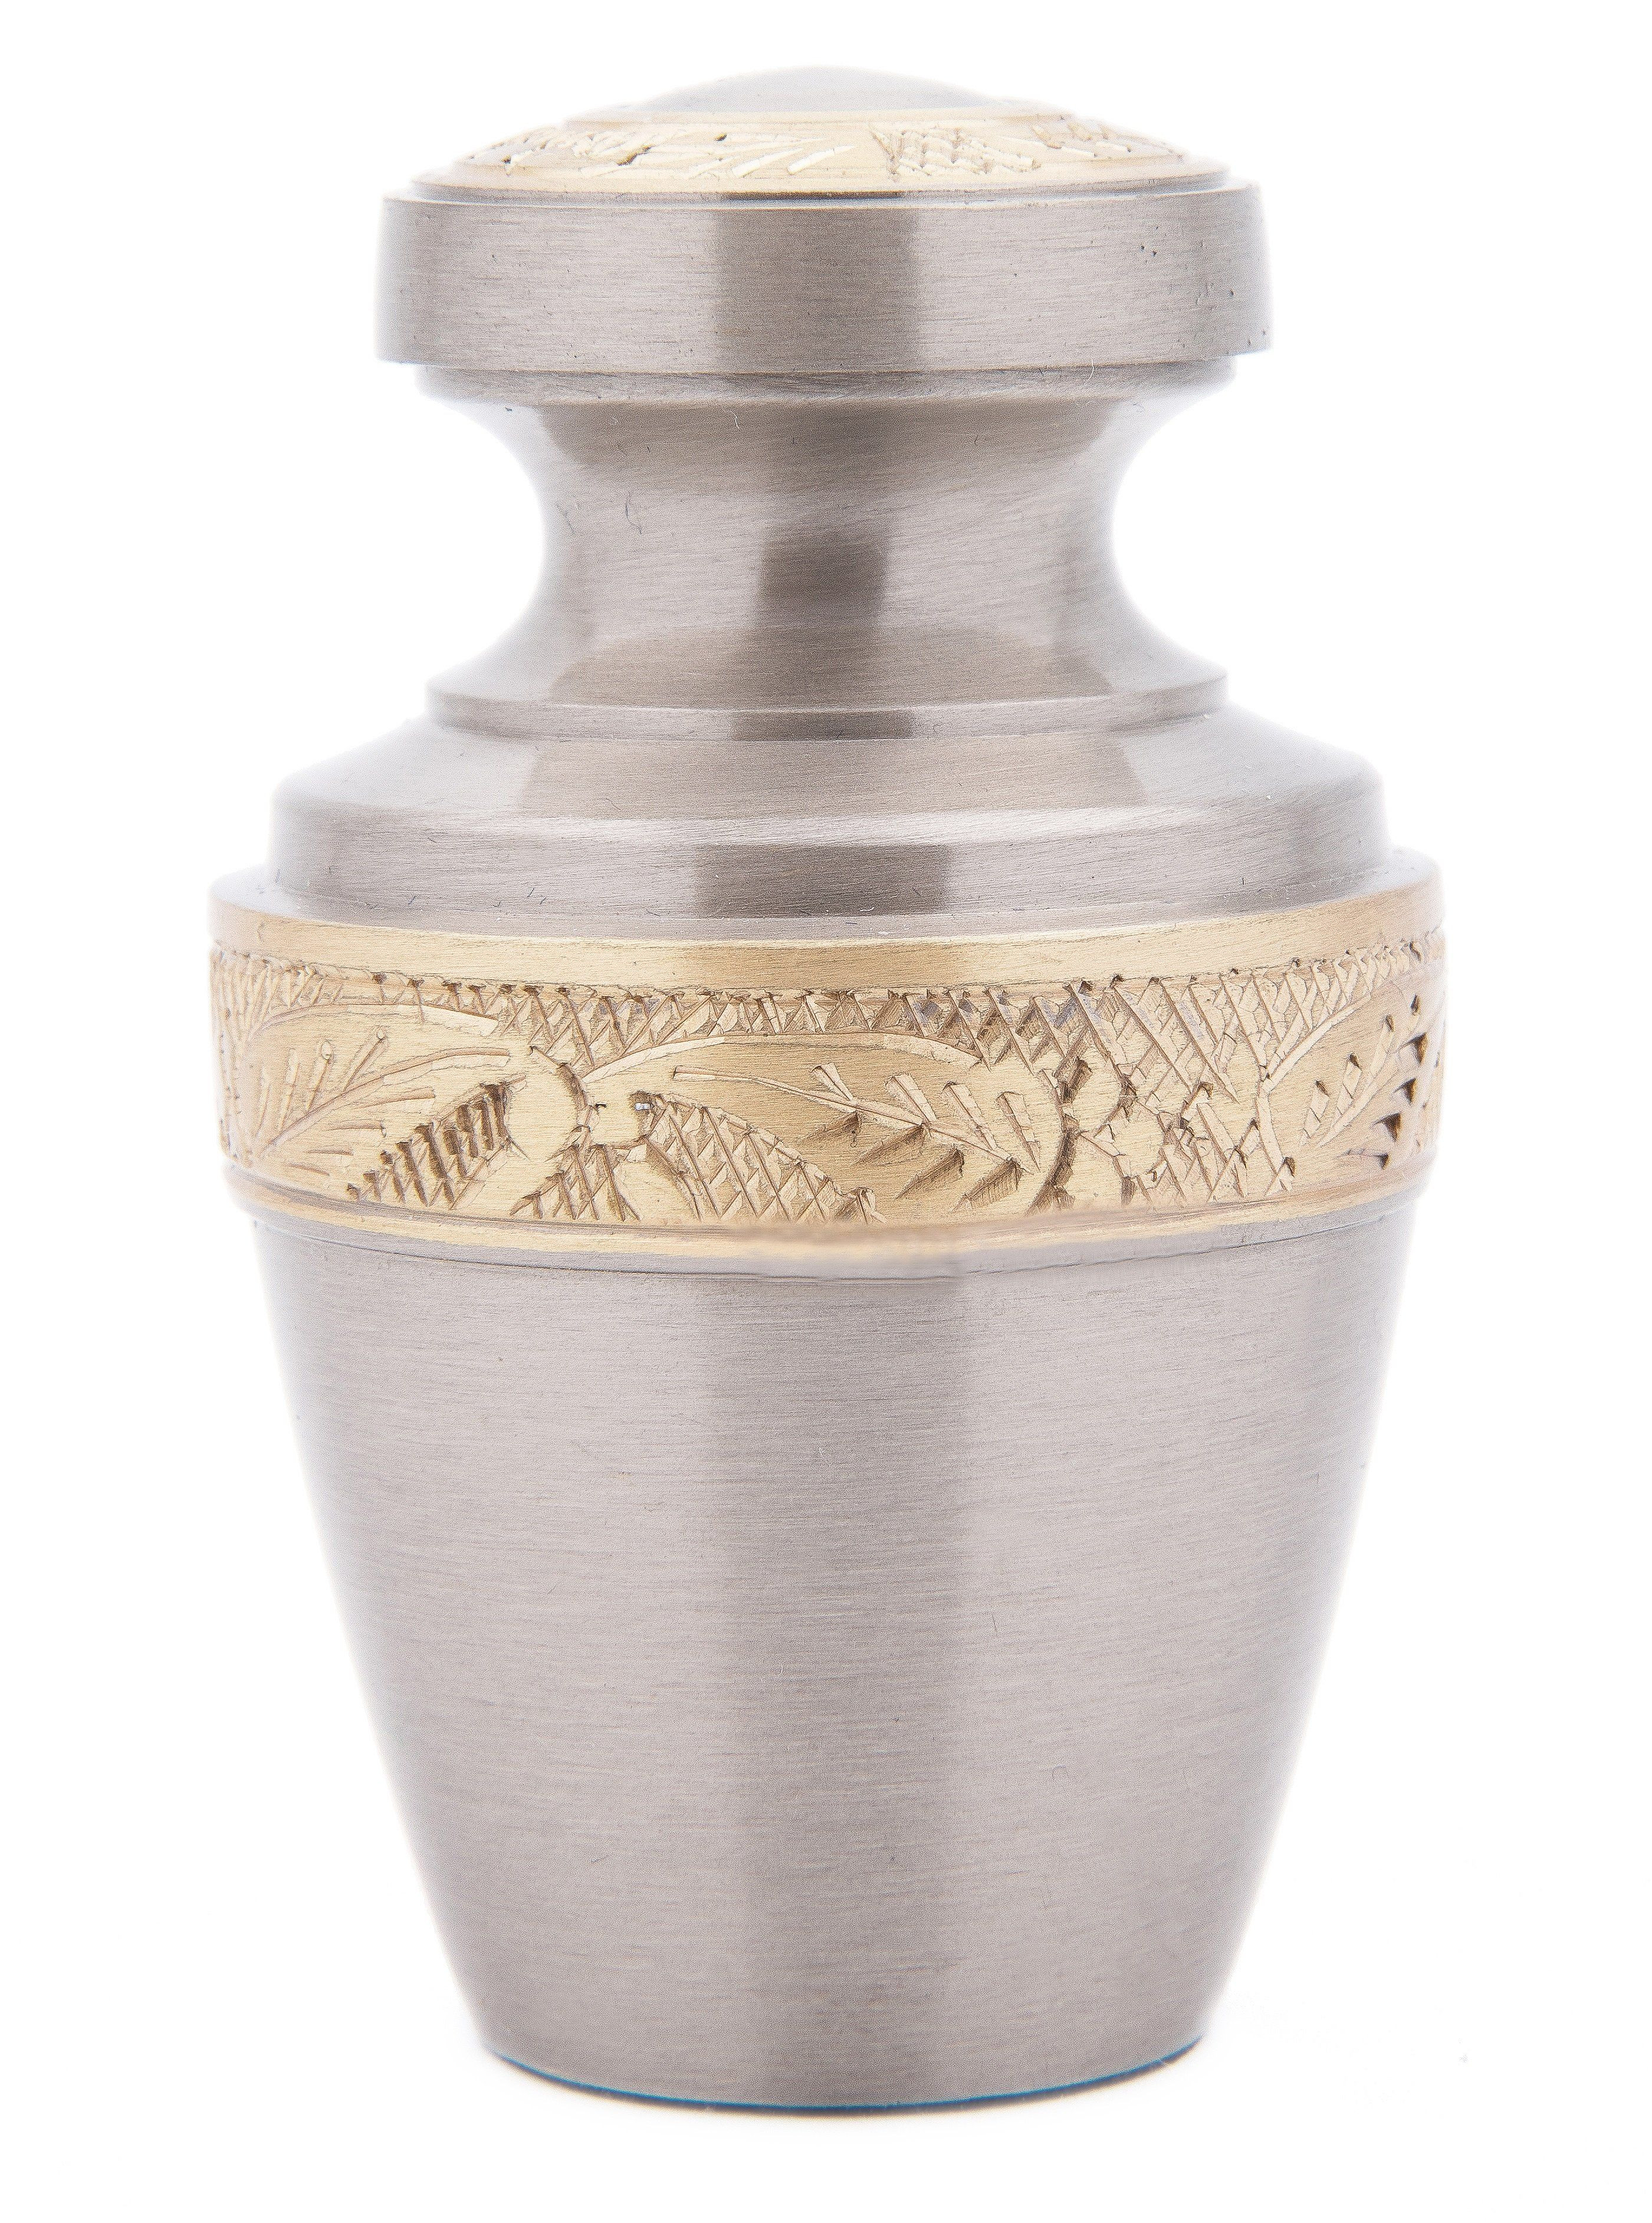 28 Recommended Gold Urn Vase 2024 free download gold urn vase of purity nickel and gold remembering my pet pinterest pertaining to purity nickel and gold